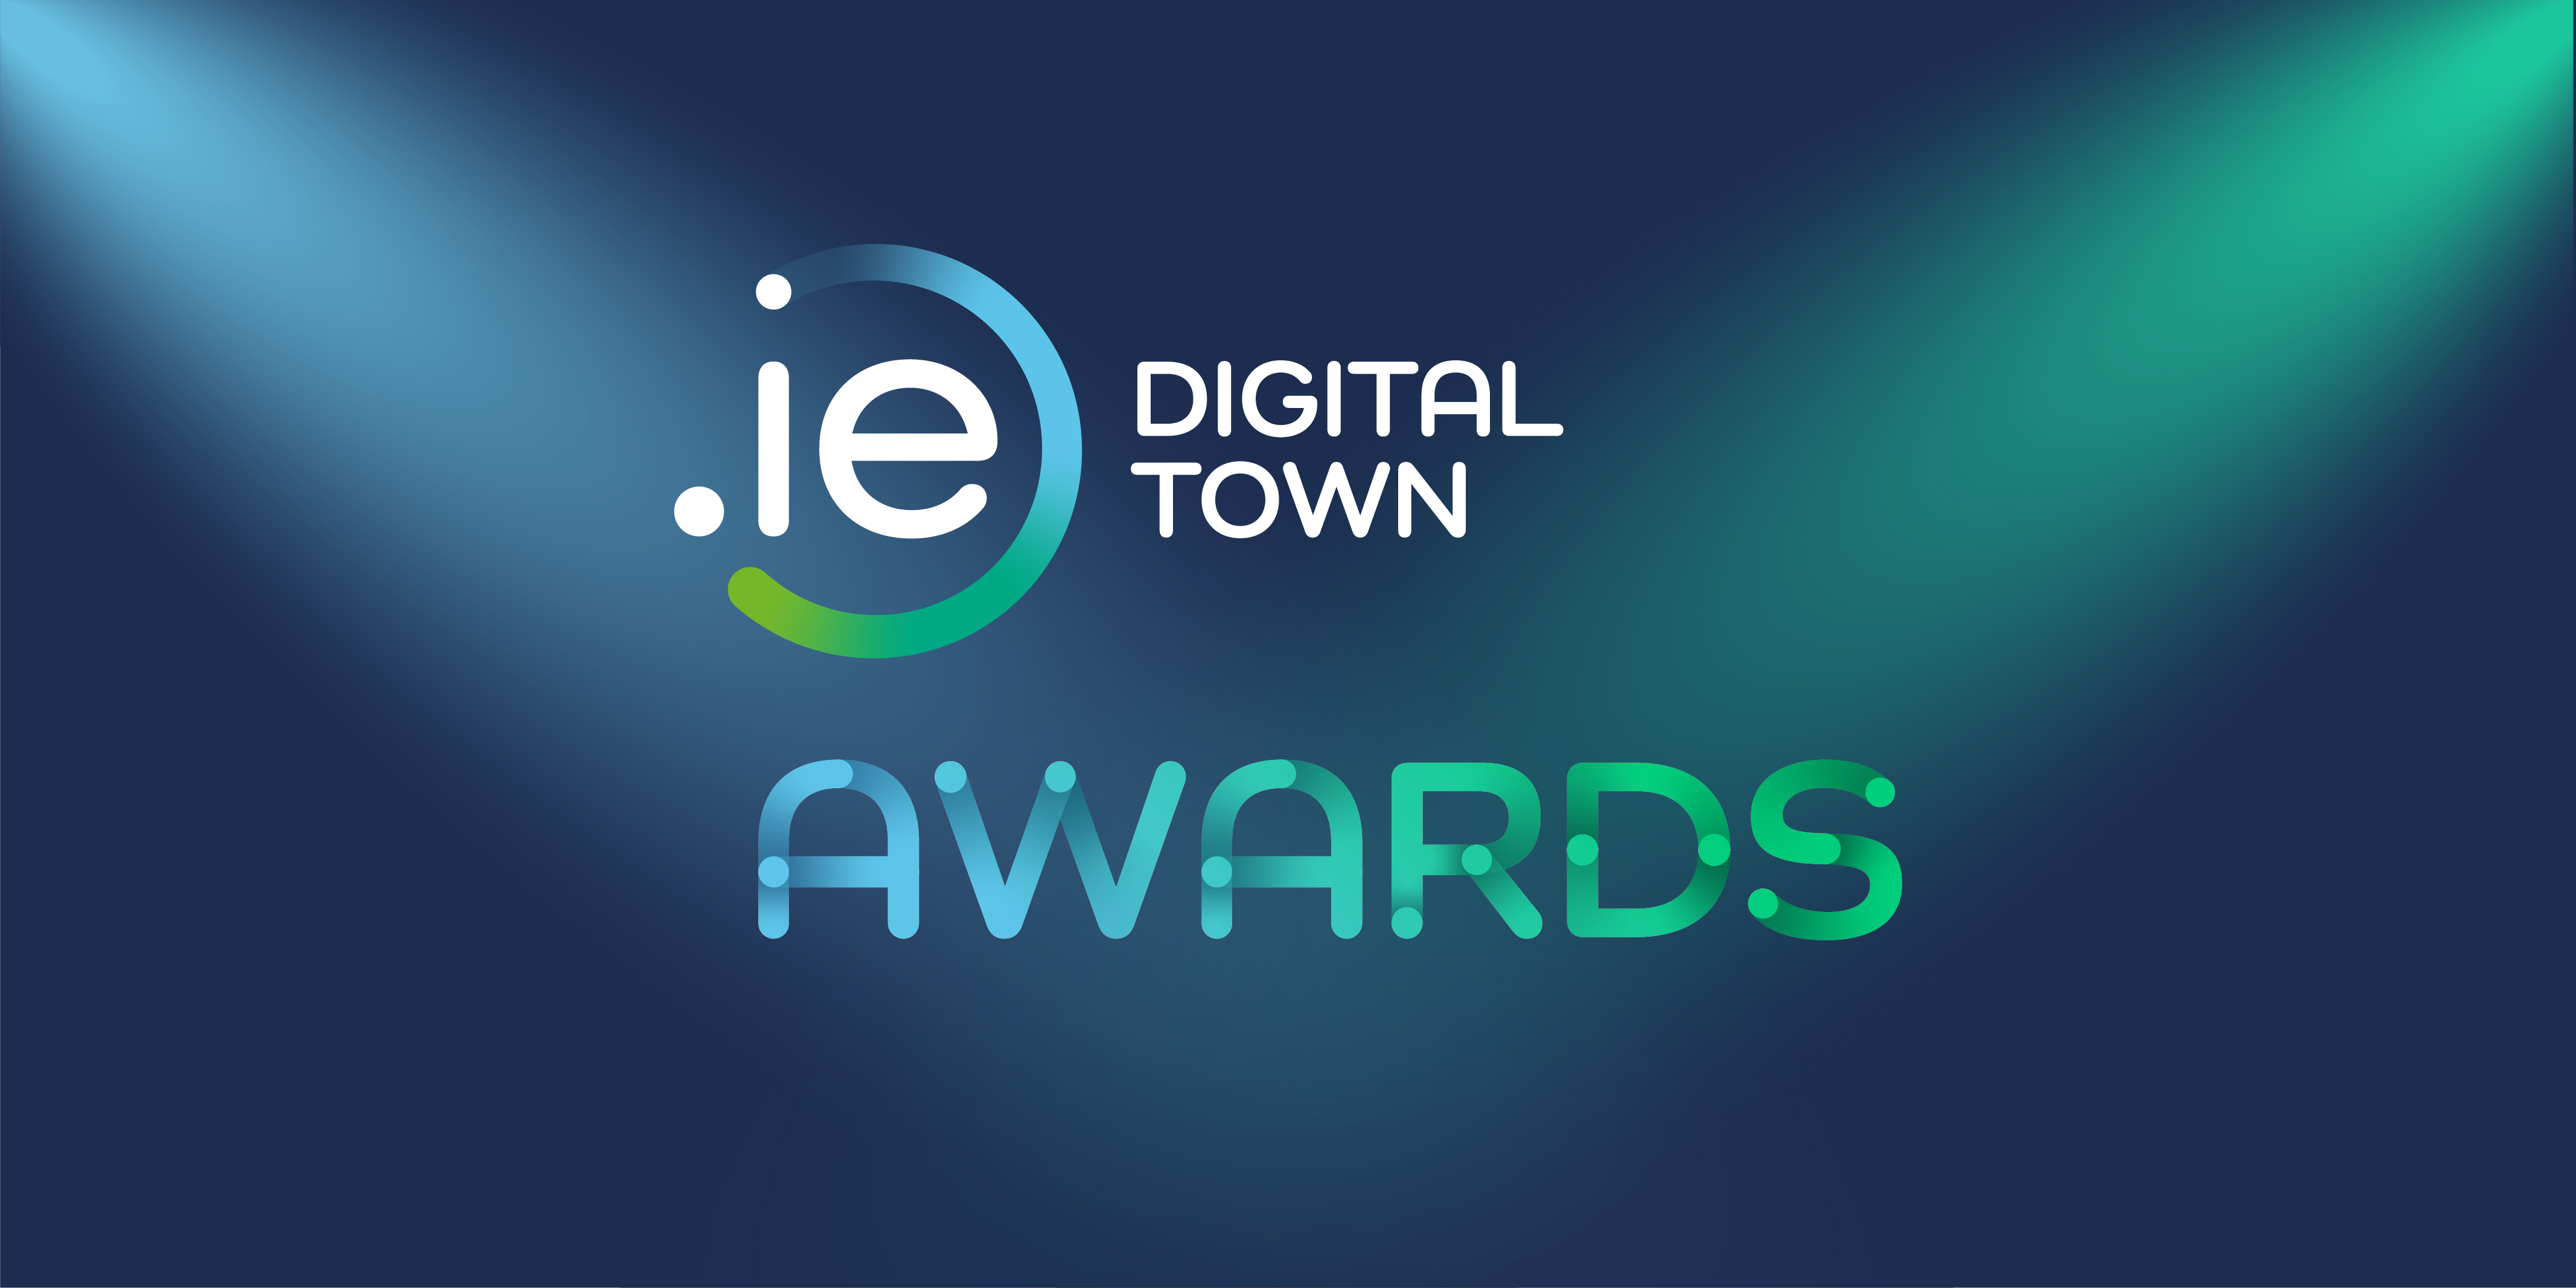 Dingle Peninsula is the overall winner of the .IE Digital Town Awards 2021